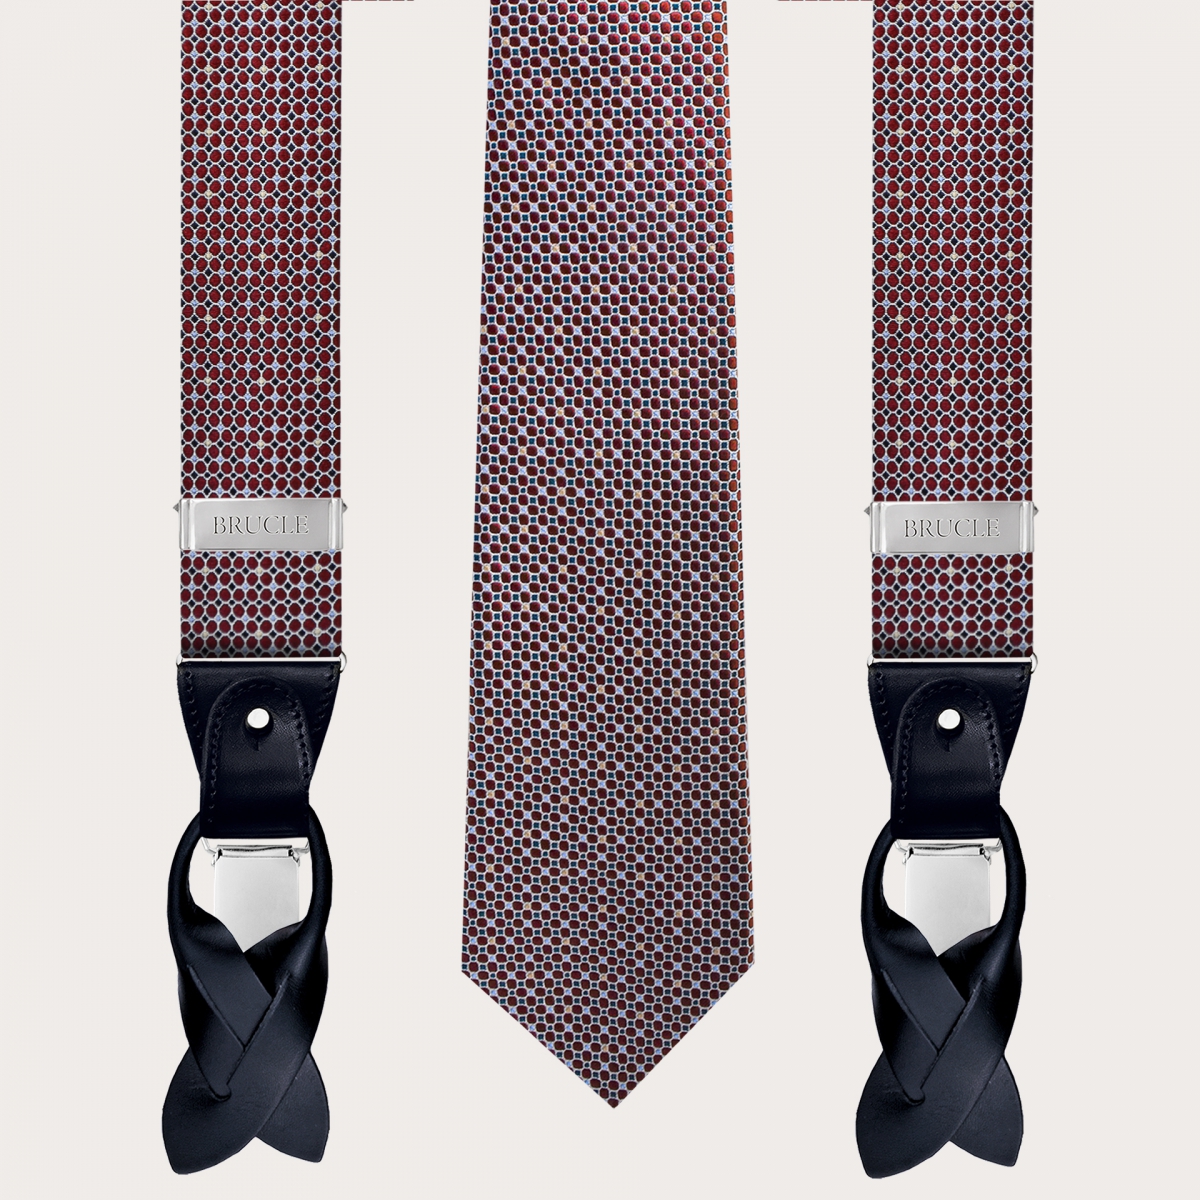 Coordinated suspenders and necktie in silk, abstract burgundy polka dot pattern with light blue accents